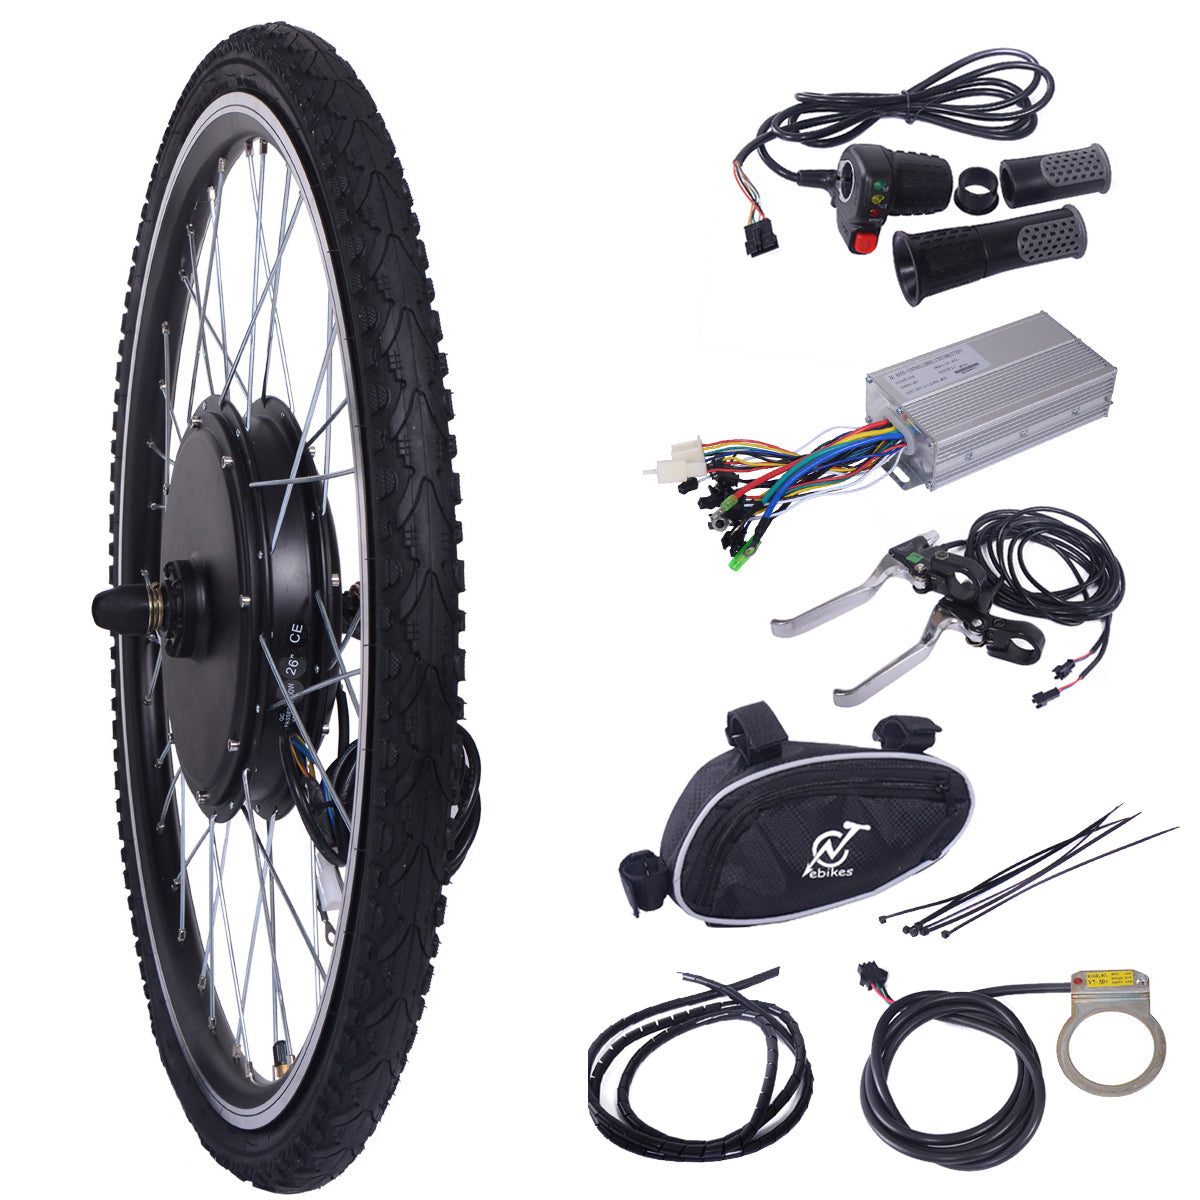 front wheel motor for bicycle